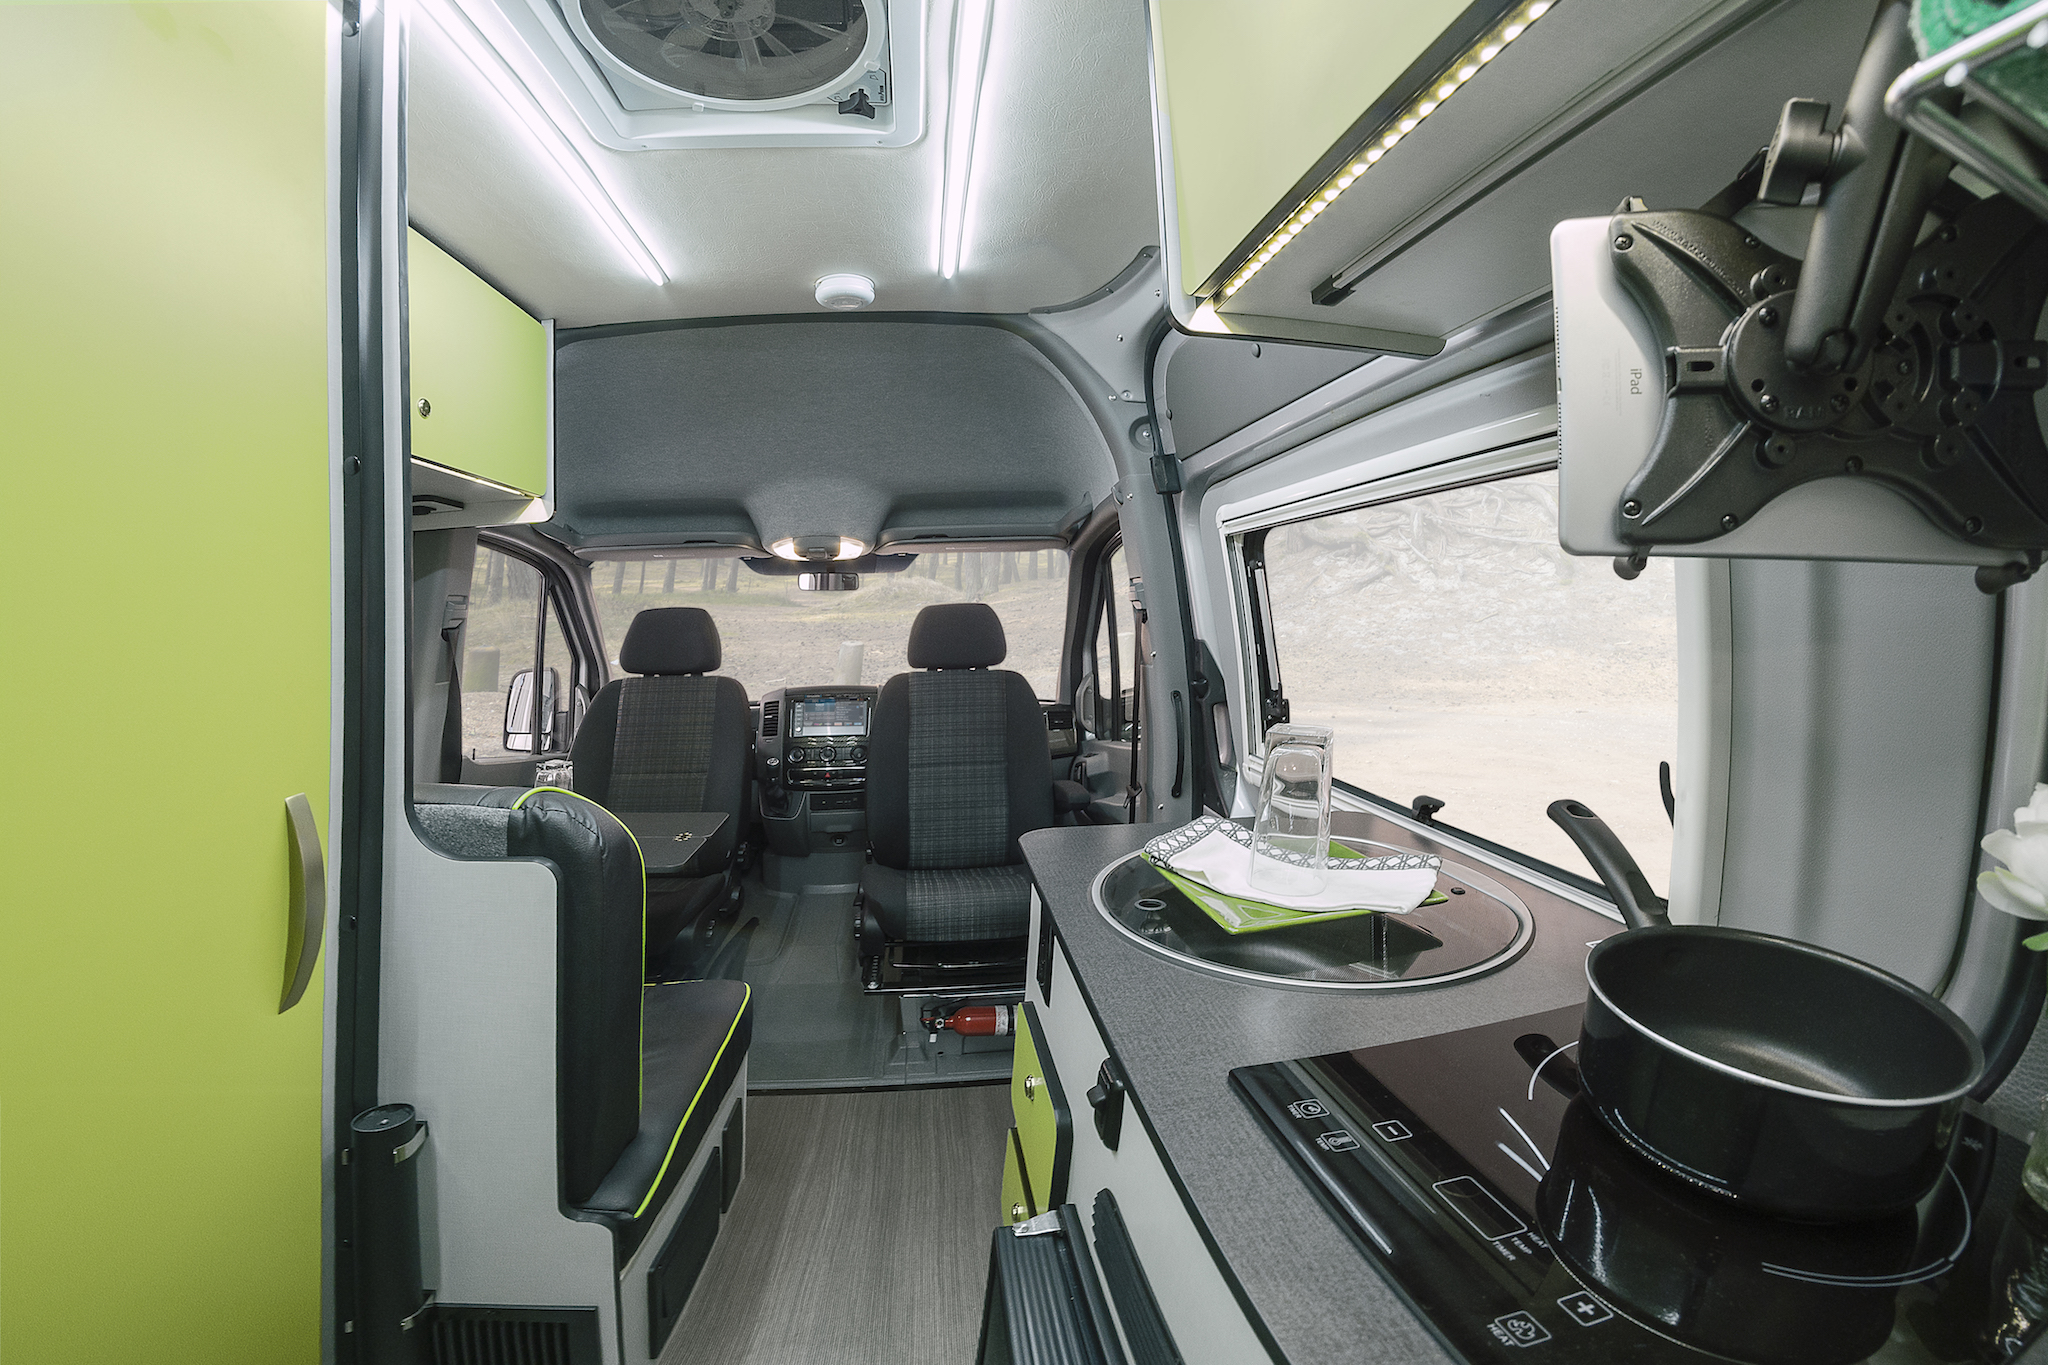 Kitchenette and front cab area of the Winnebago Revel.